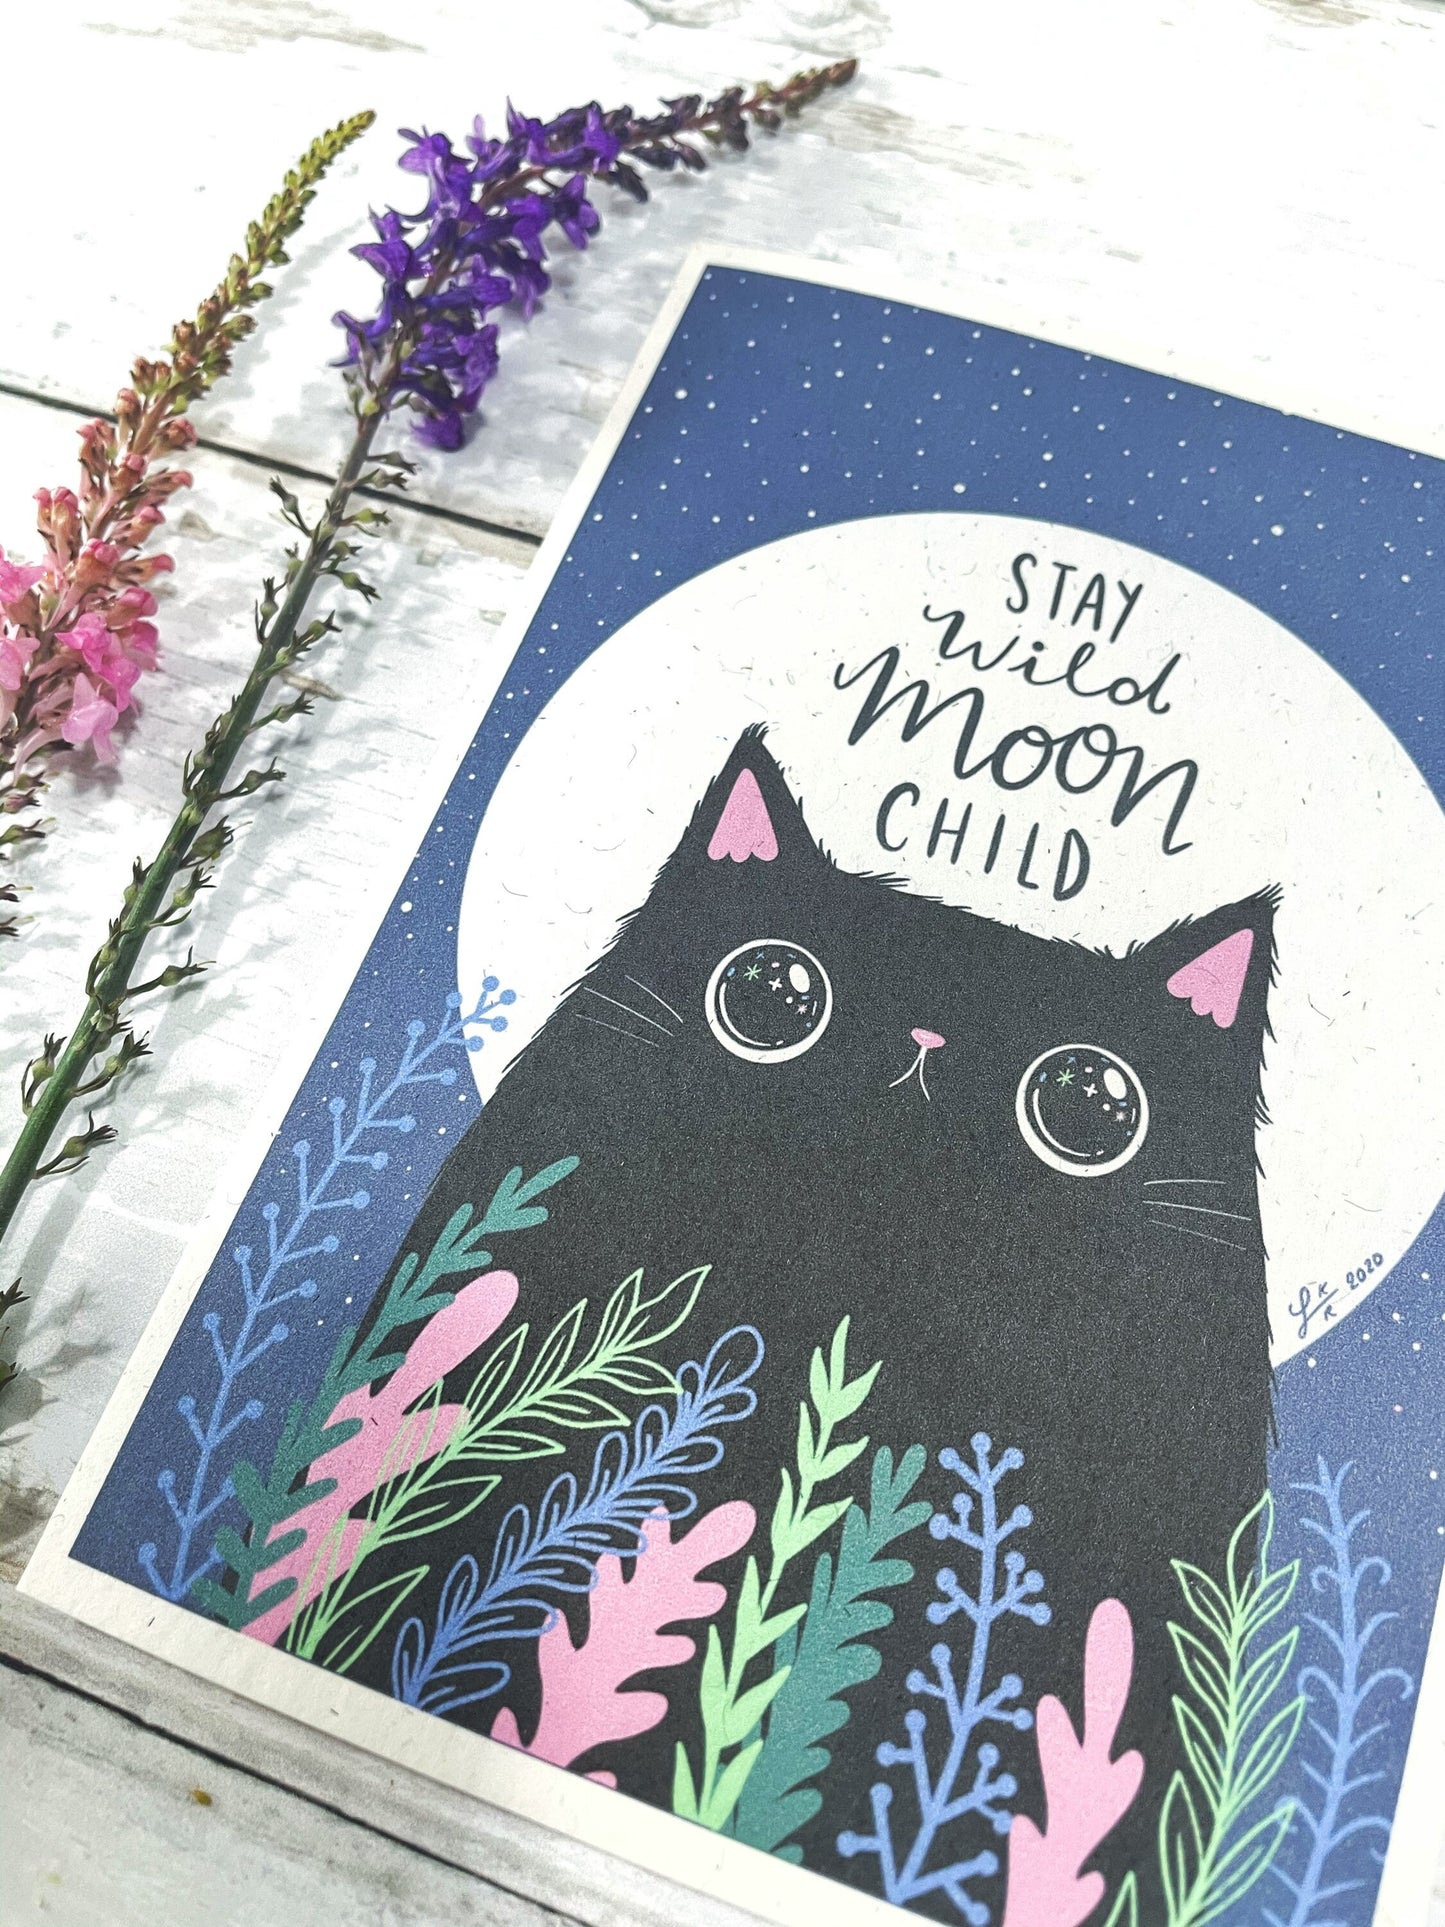 Stay wild moon child greeting card black cat card under the moon greeting card